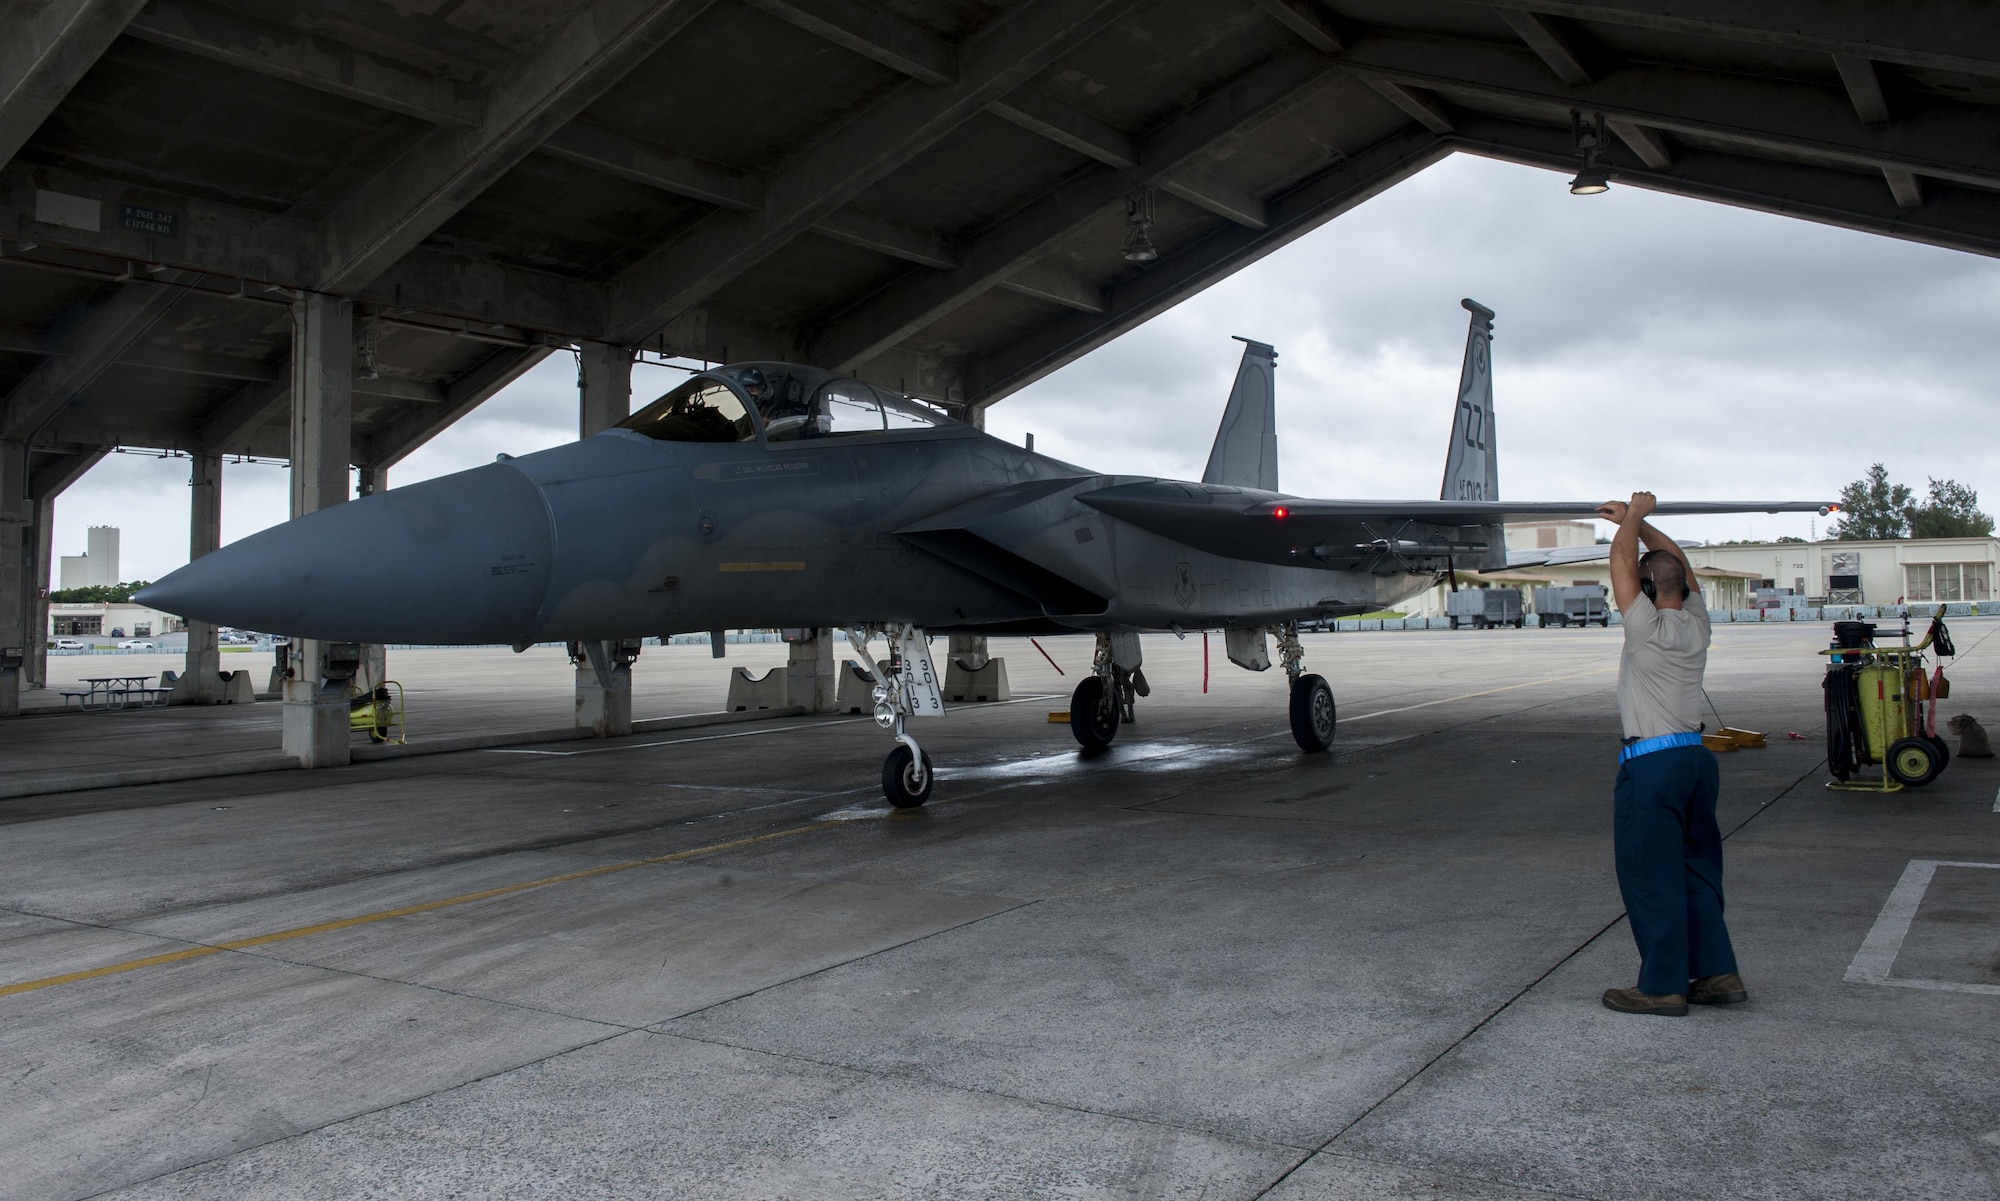 U.S. Air Force Senior Airman Devon Powell, 44th Aircraft Maintenance Unit dedicated crew chief, marshalls in an F-15C Eagle for maintanence, April 26, 2016, at Kadena Air Base Japan. After landing, each F-15C parks in a designated hangar for inspection and possible maintenance to be ready to fly again at a moment’s notice. (U.S. Air Force photo by Airman Zackary A. Henry)